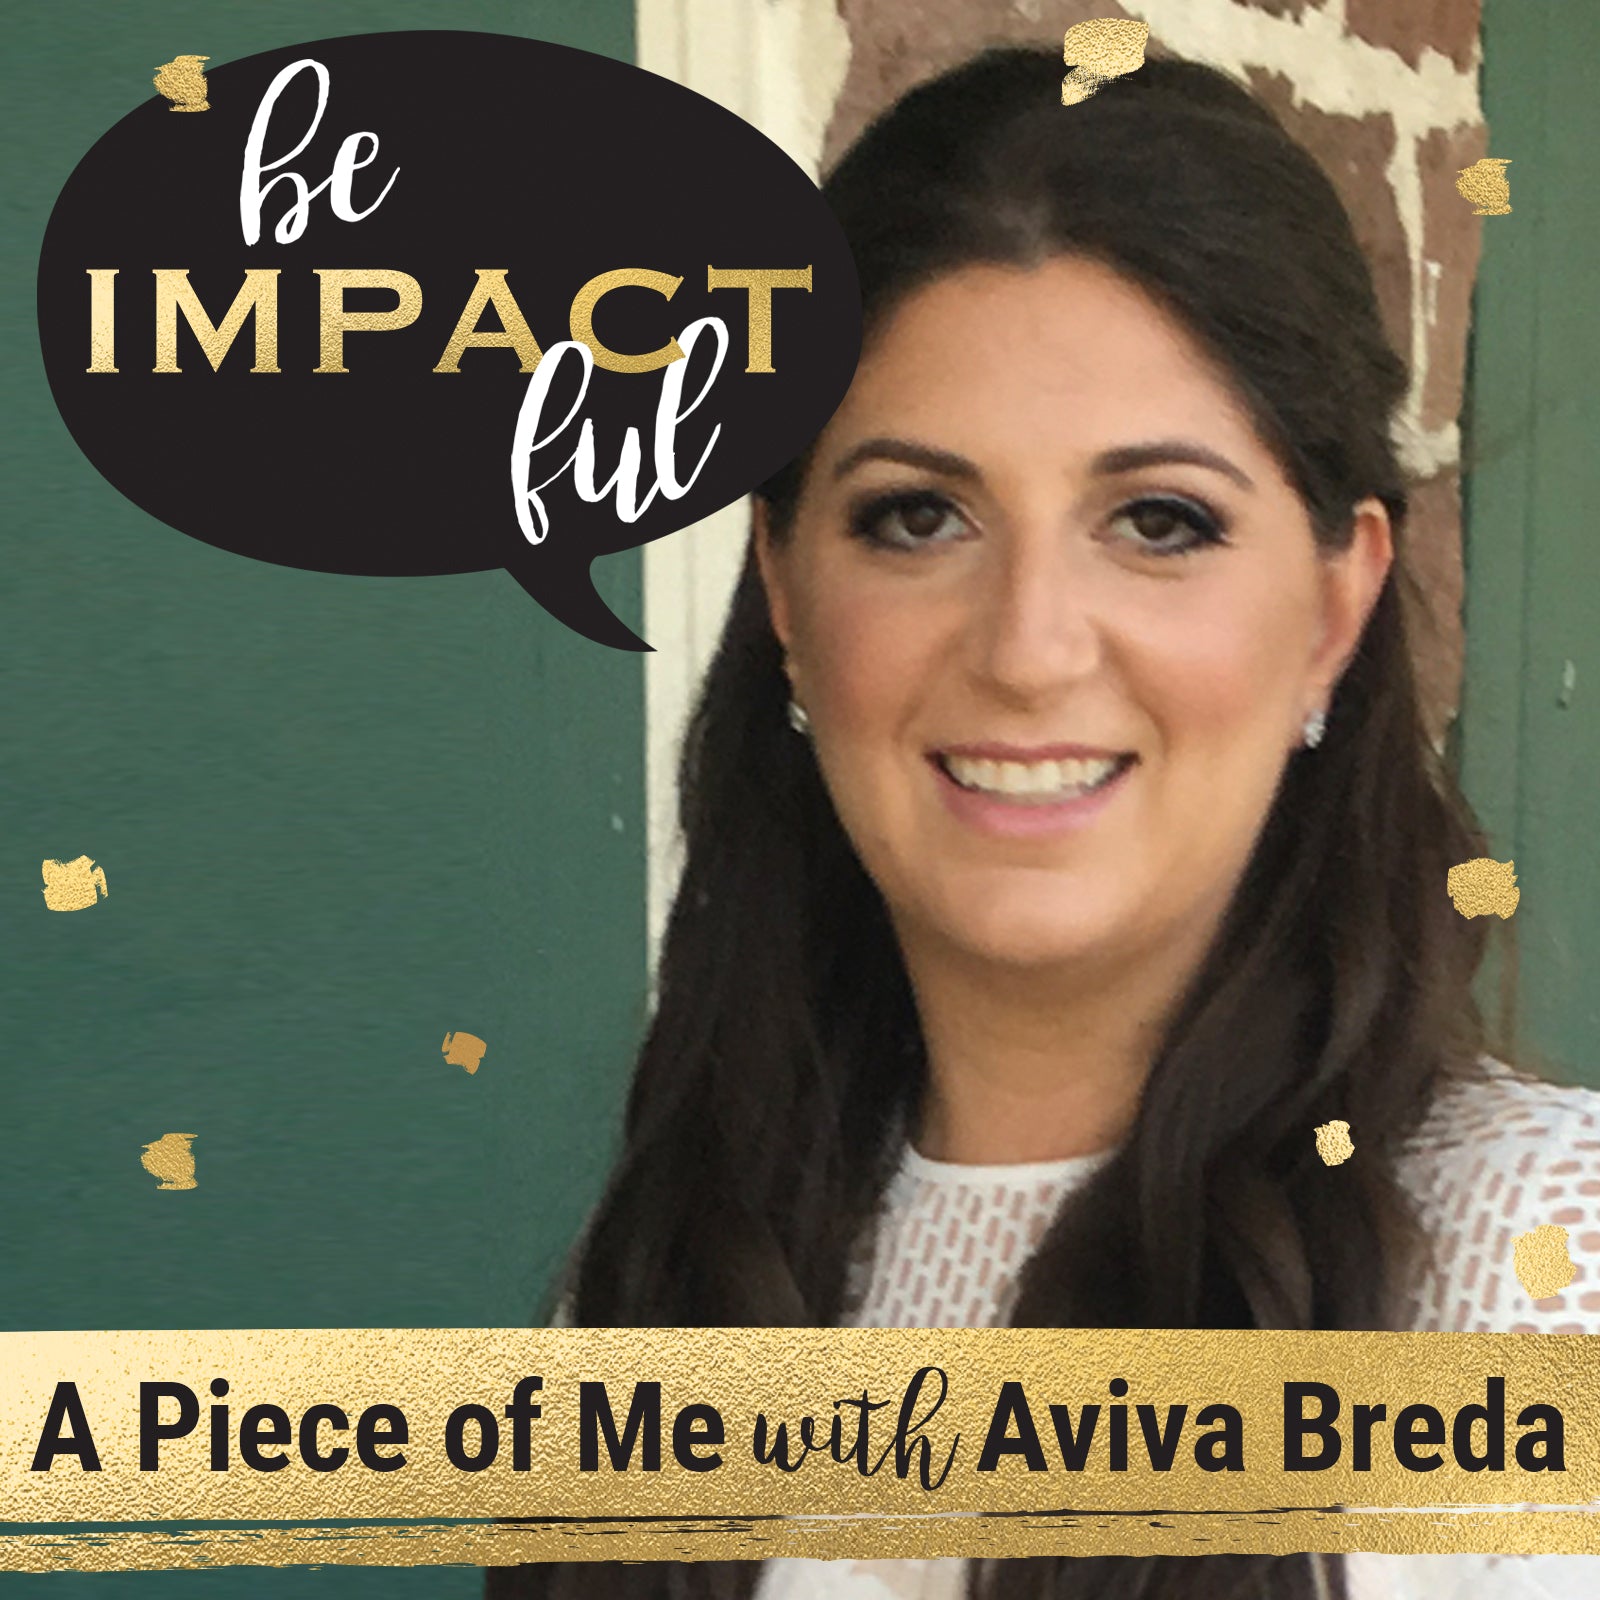 In celebration of her new podcast! A Piece of Me with Aviva Breda